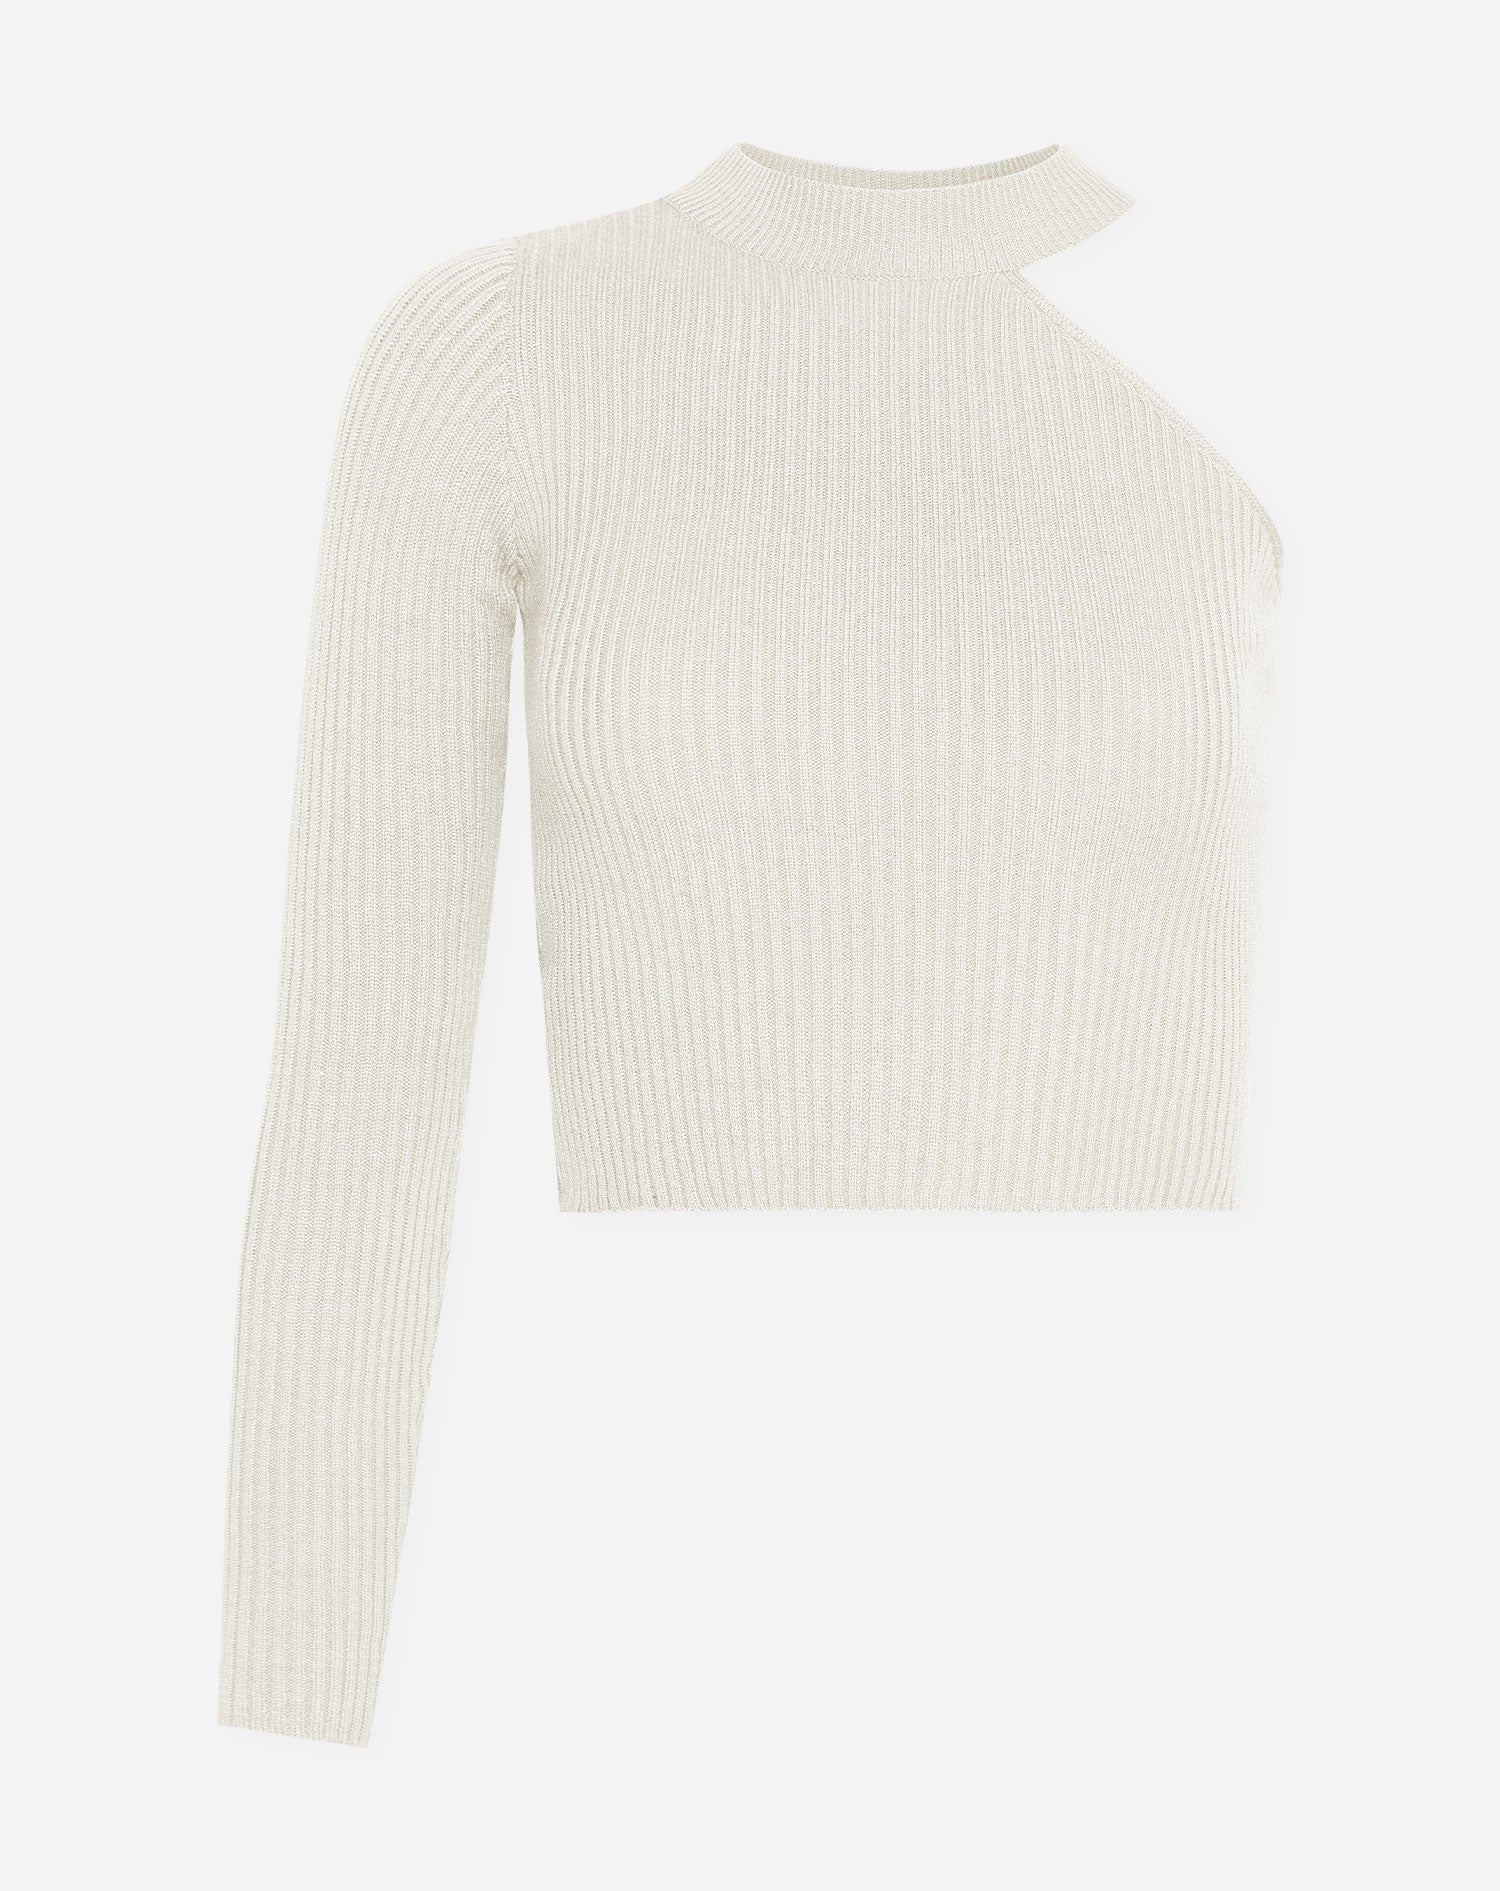 ONE SLEEVE KNIT TOP CREAM